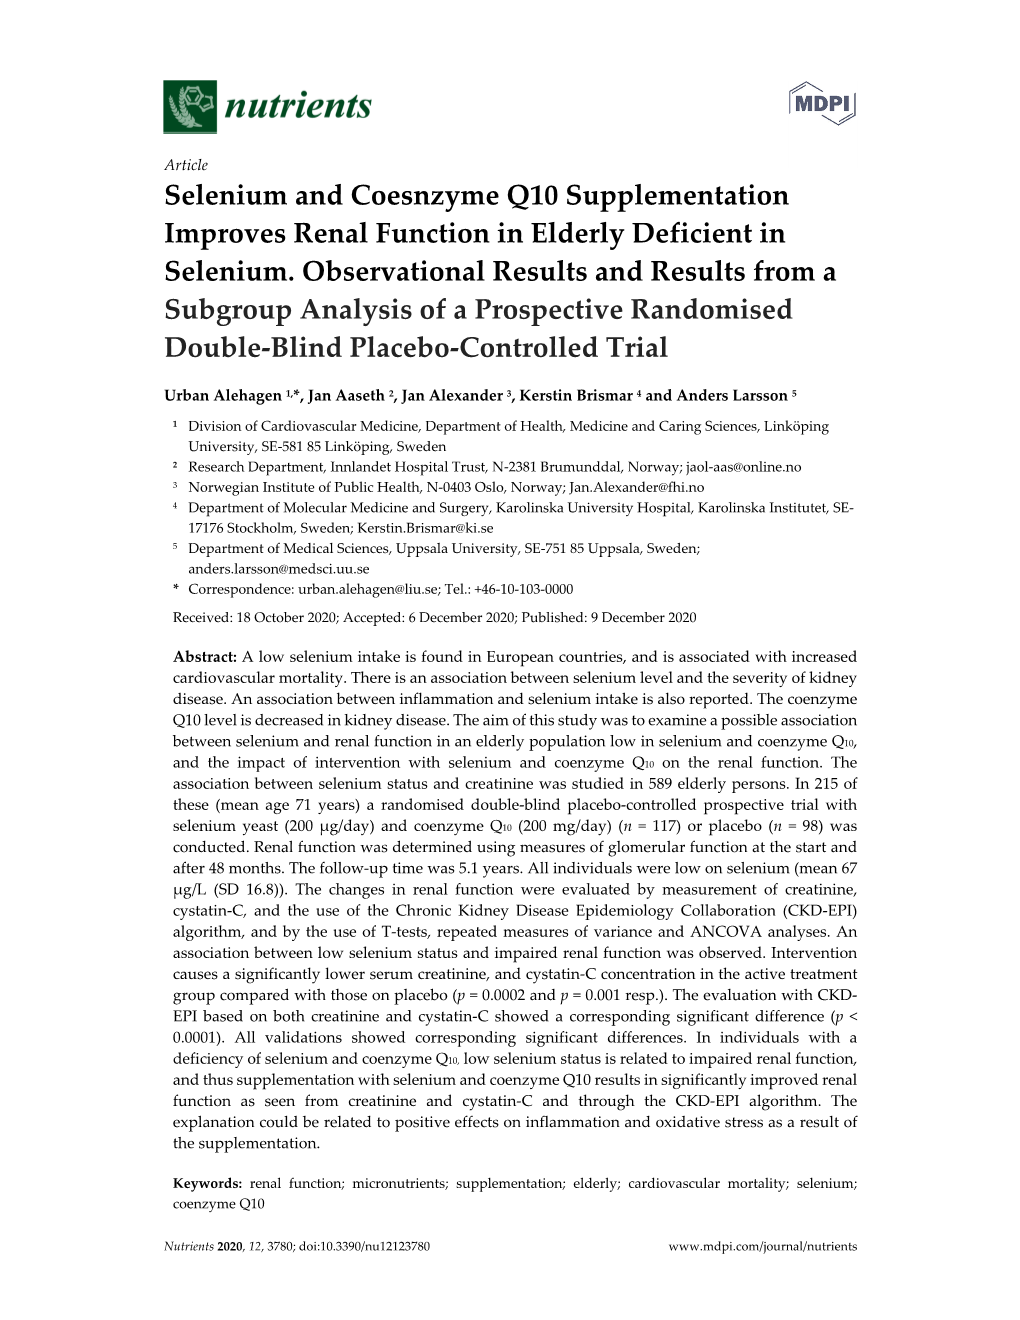 Selenium and Coesnzyme Q10 Supplementation Improves Renal Function in Elderly Deficient in Selenium